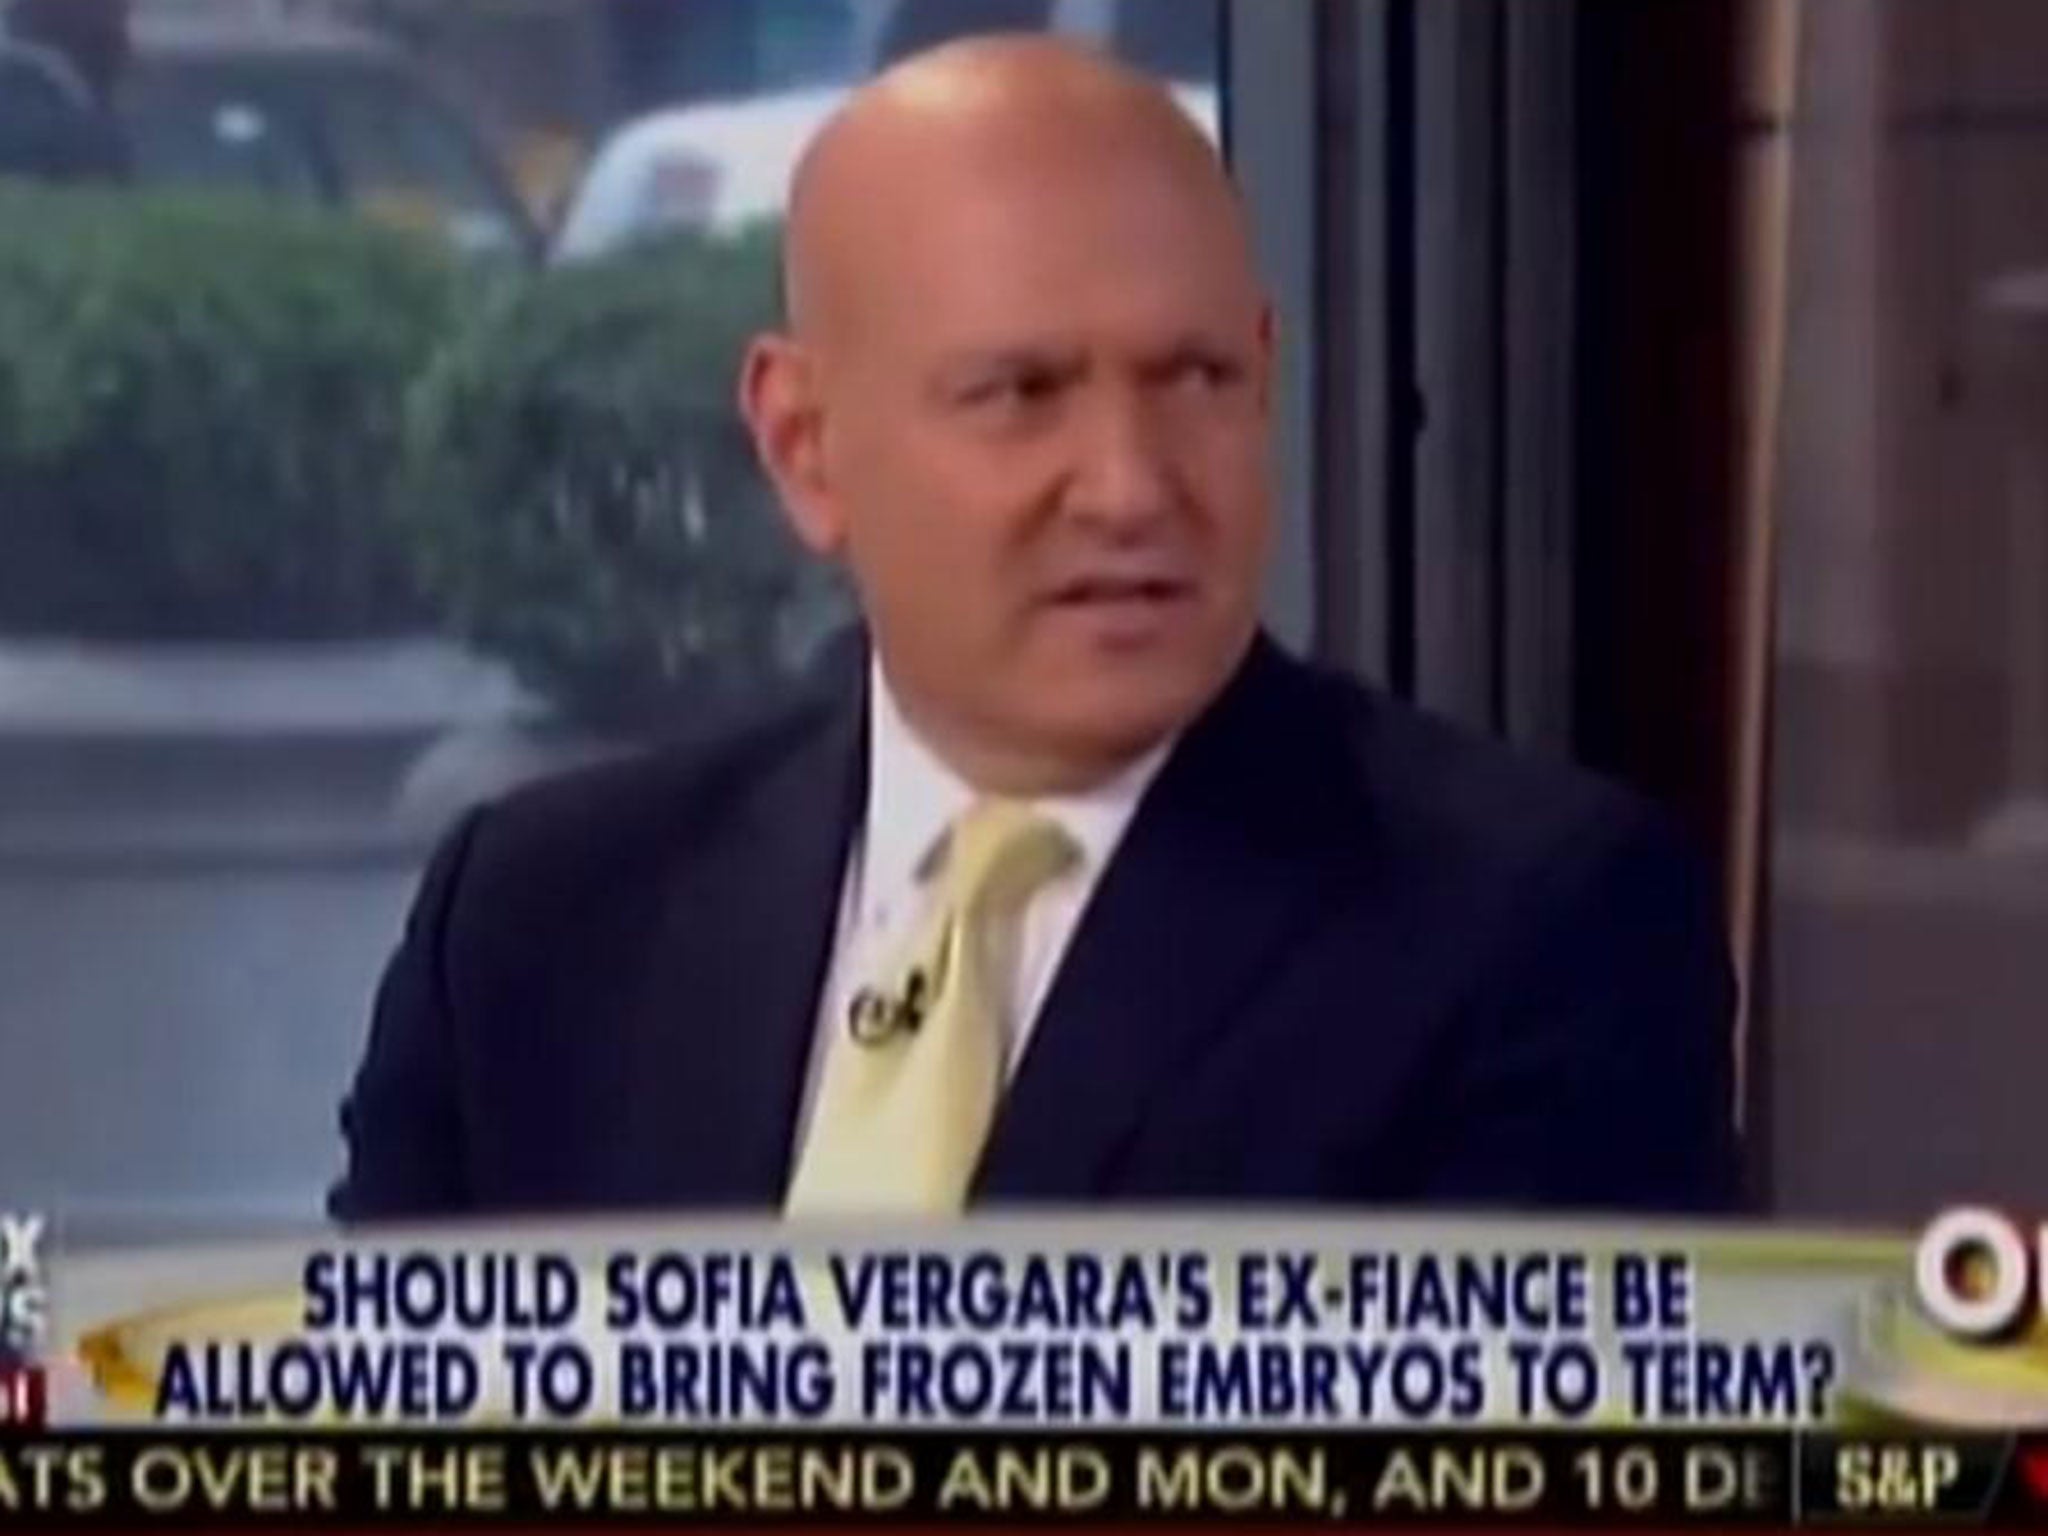 Keith Ablow can't understand why a woman's choice would 'trump a man's'